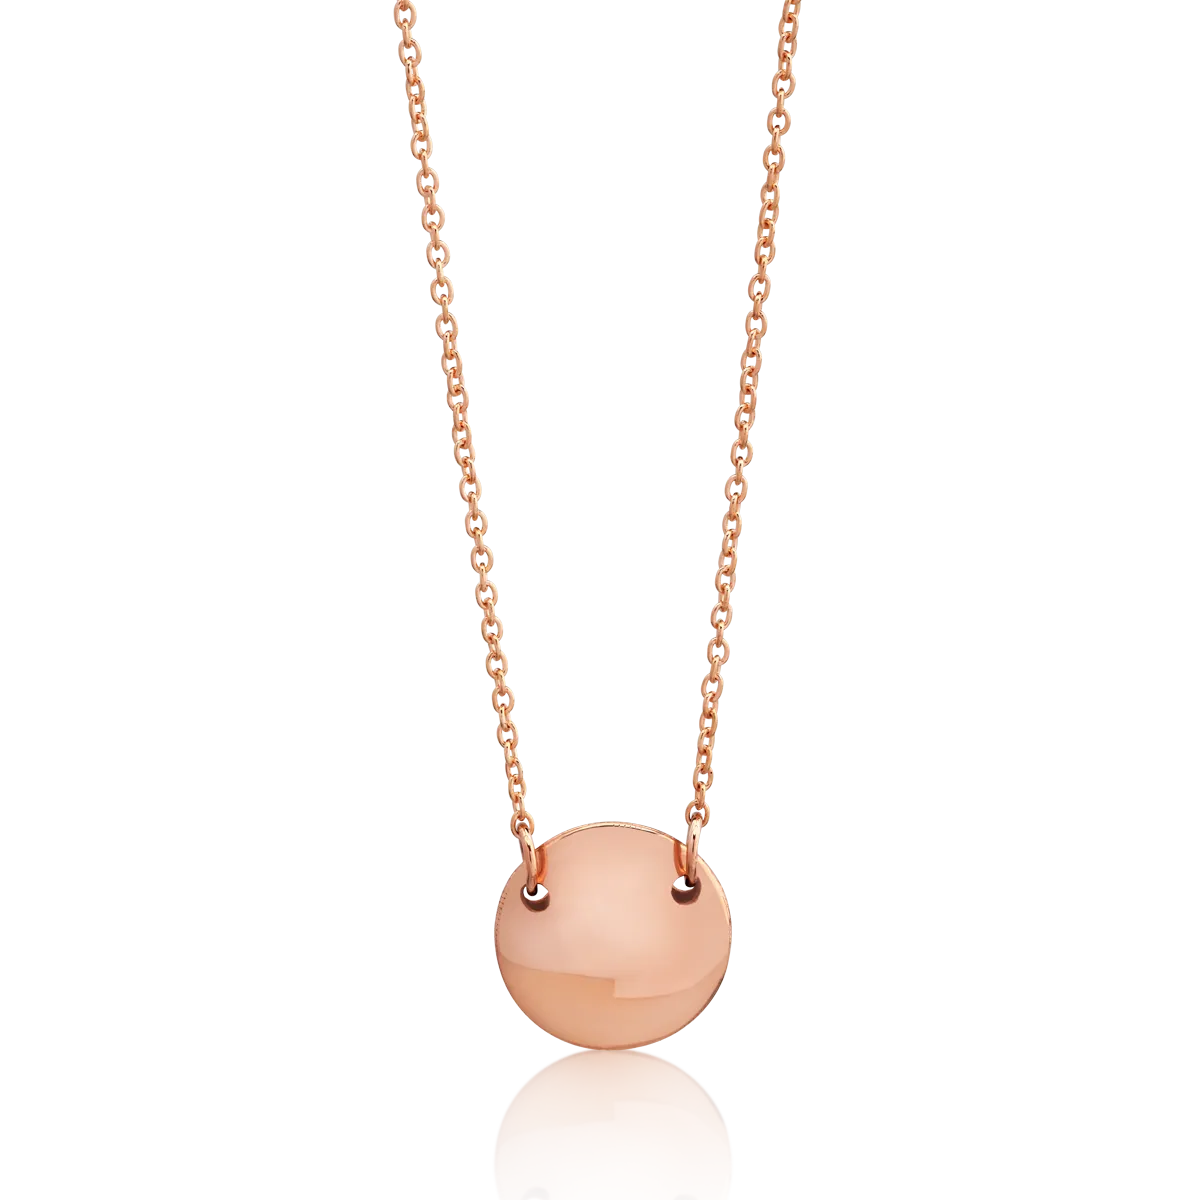 14K rose gold coin pendant chain